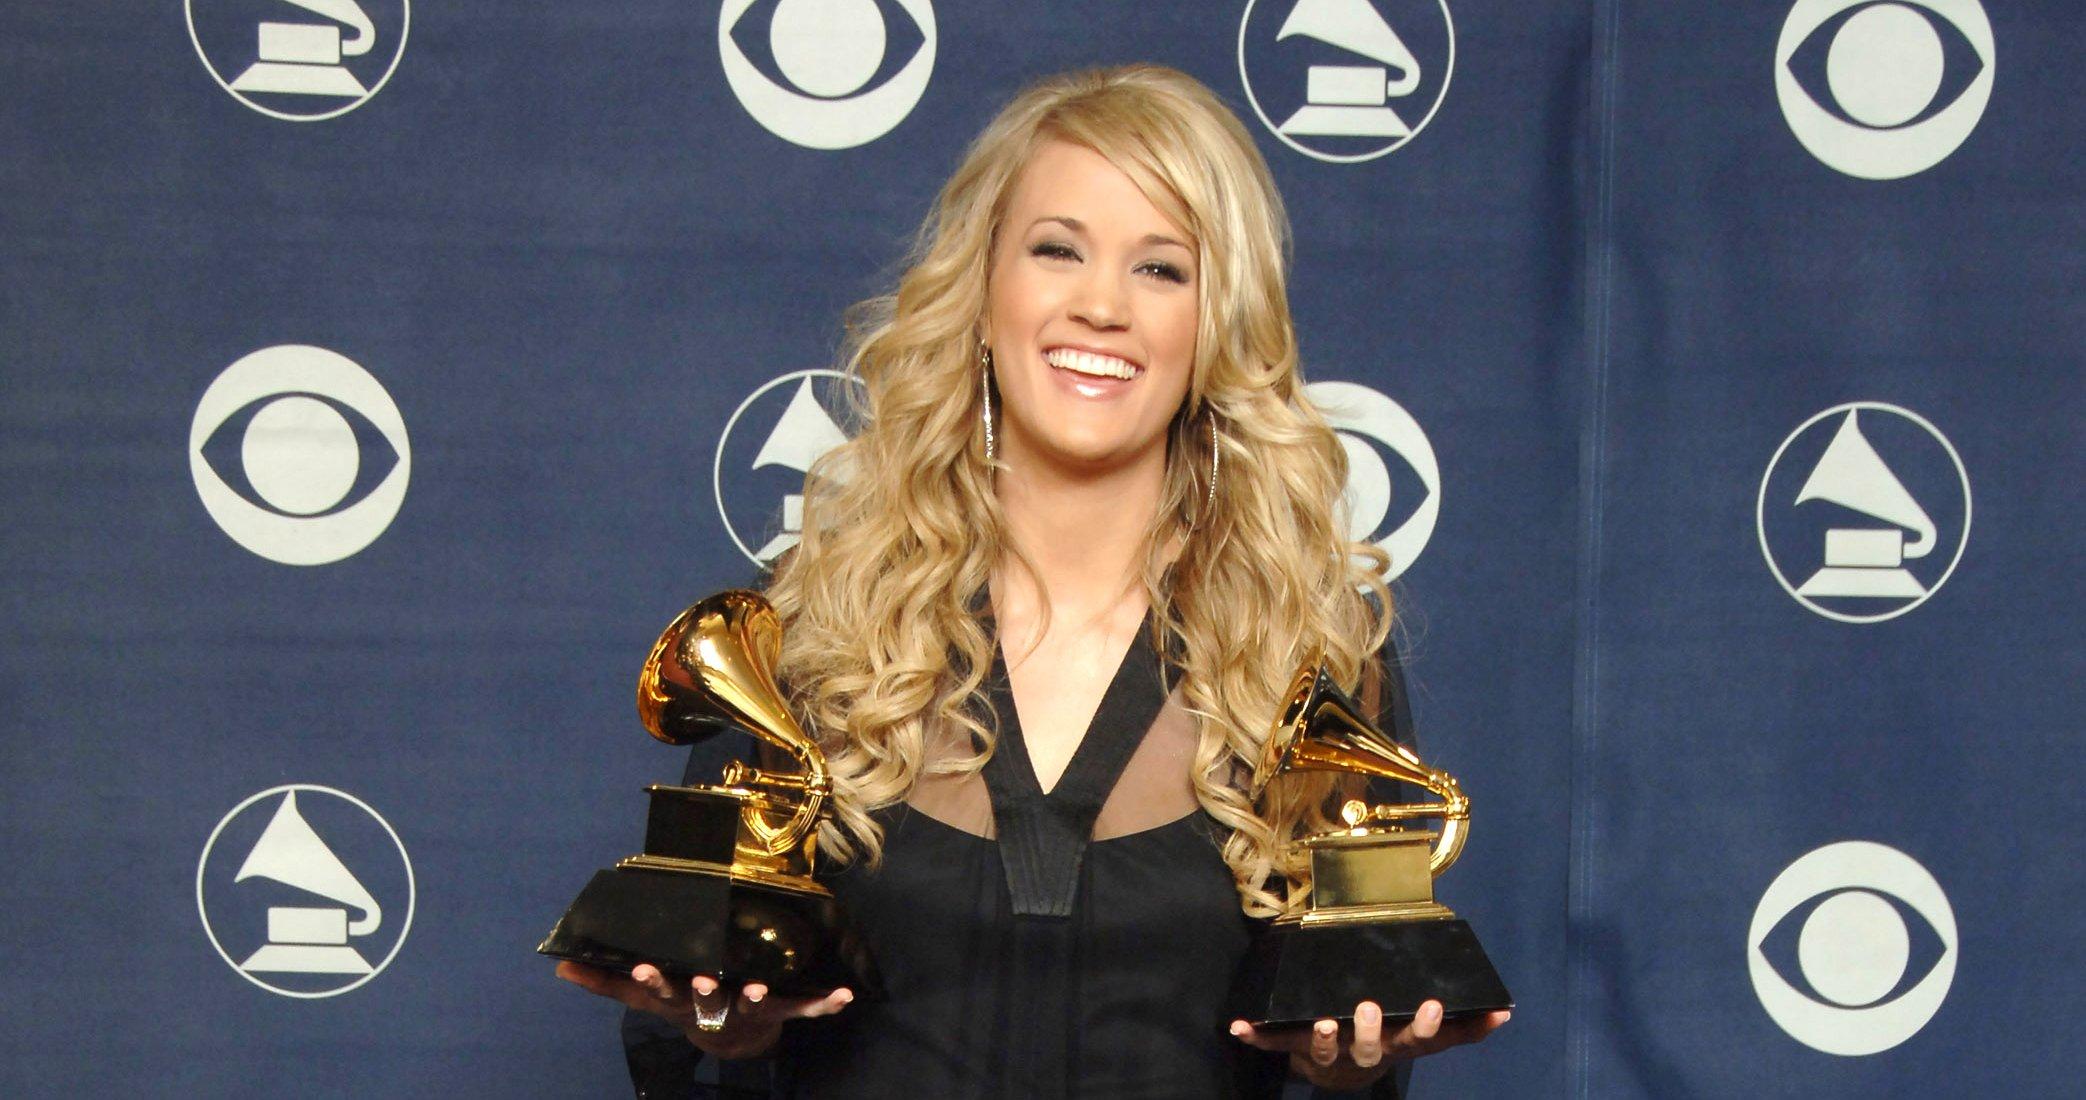 Carrie Underwood at the 2007 GRAMMYs